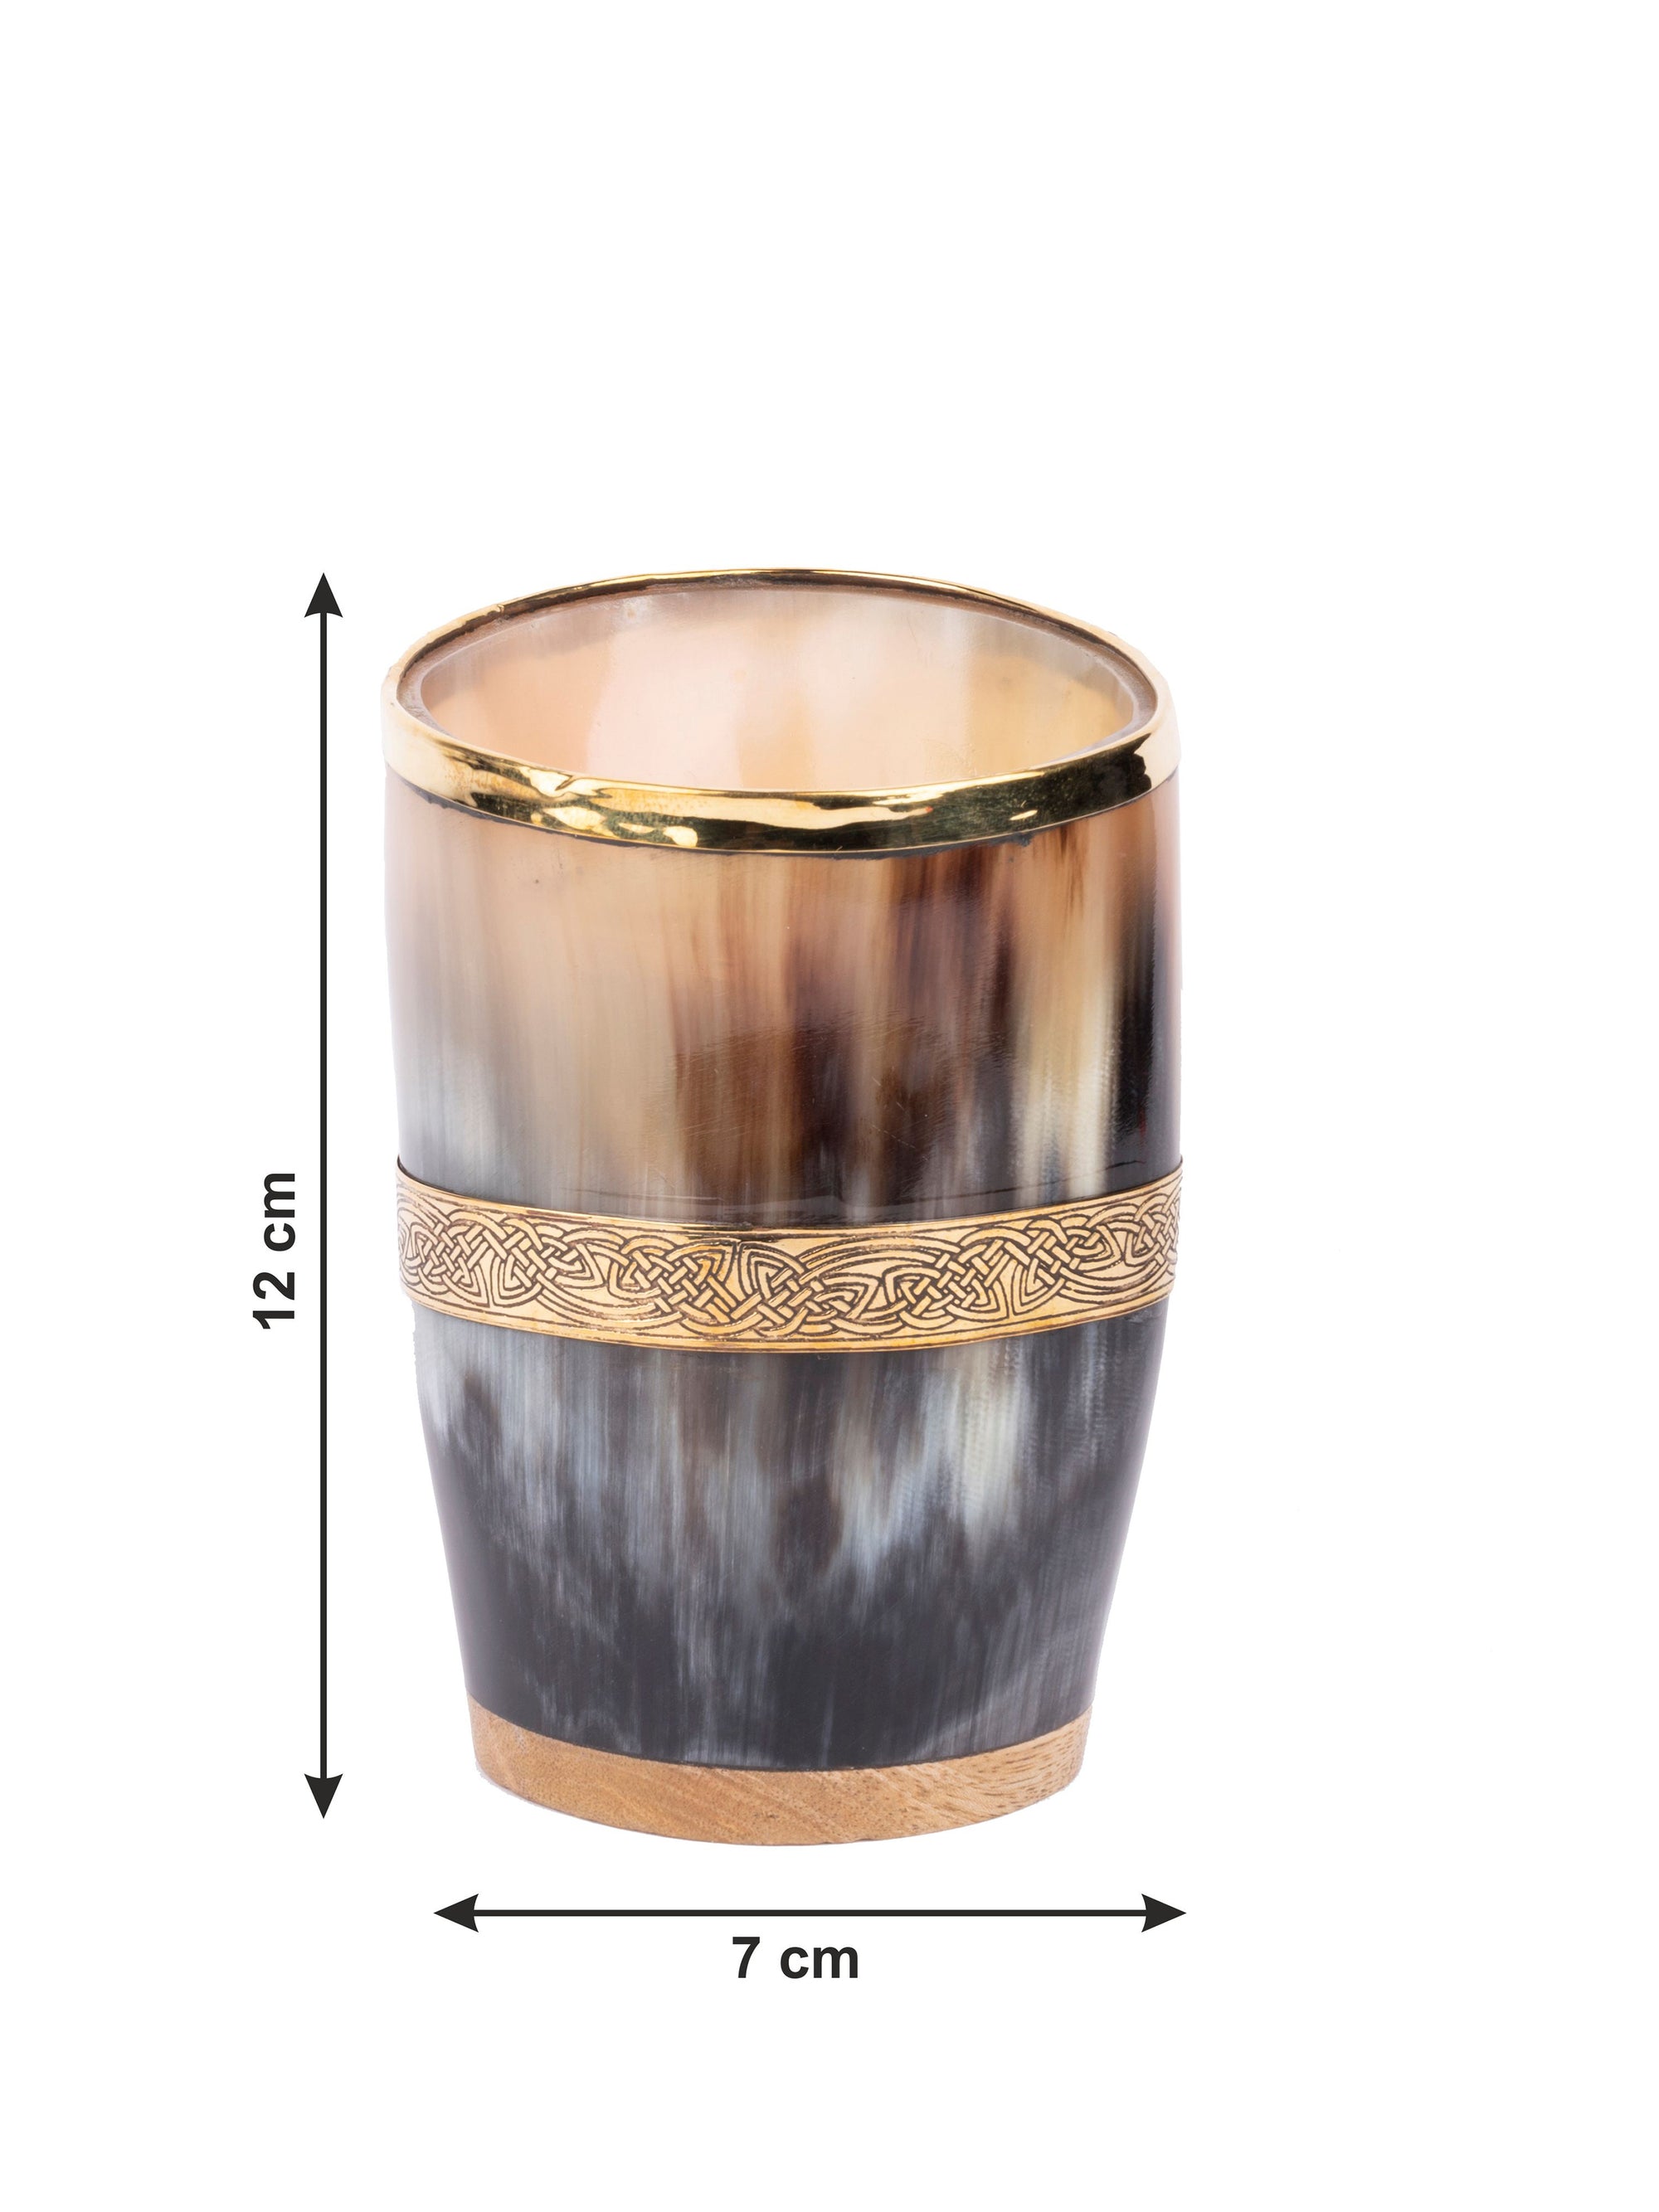 Natural Buffalo Horn Small Tumbler / Glass with Golden edge - 200 ml - The Heritage Artifacts